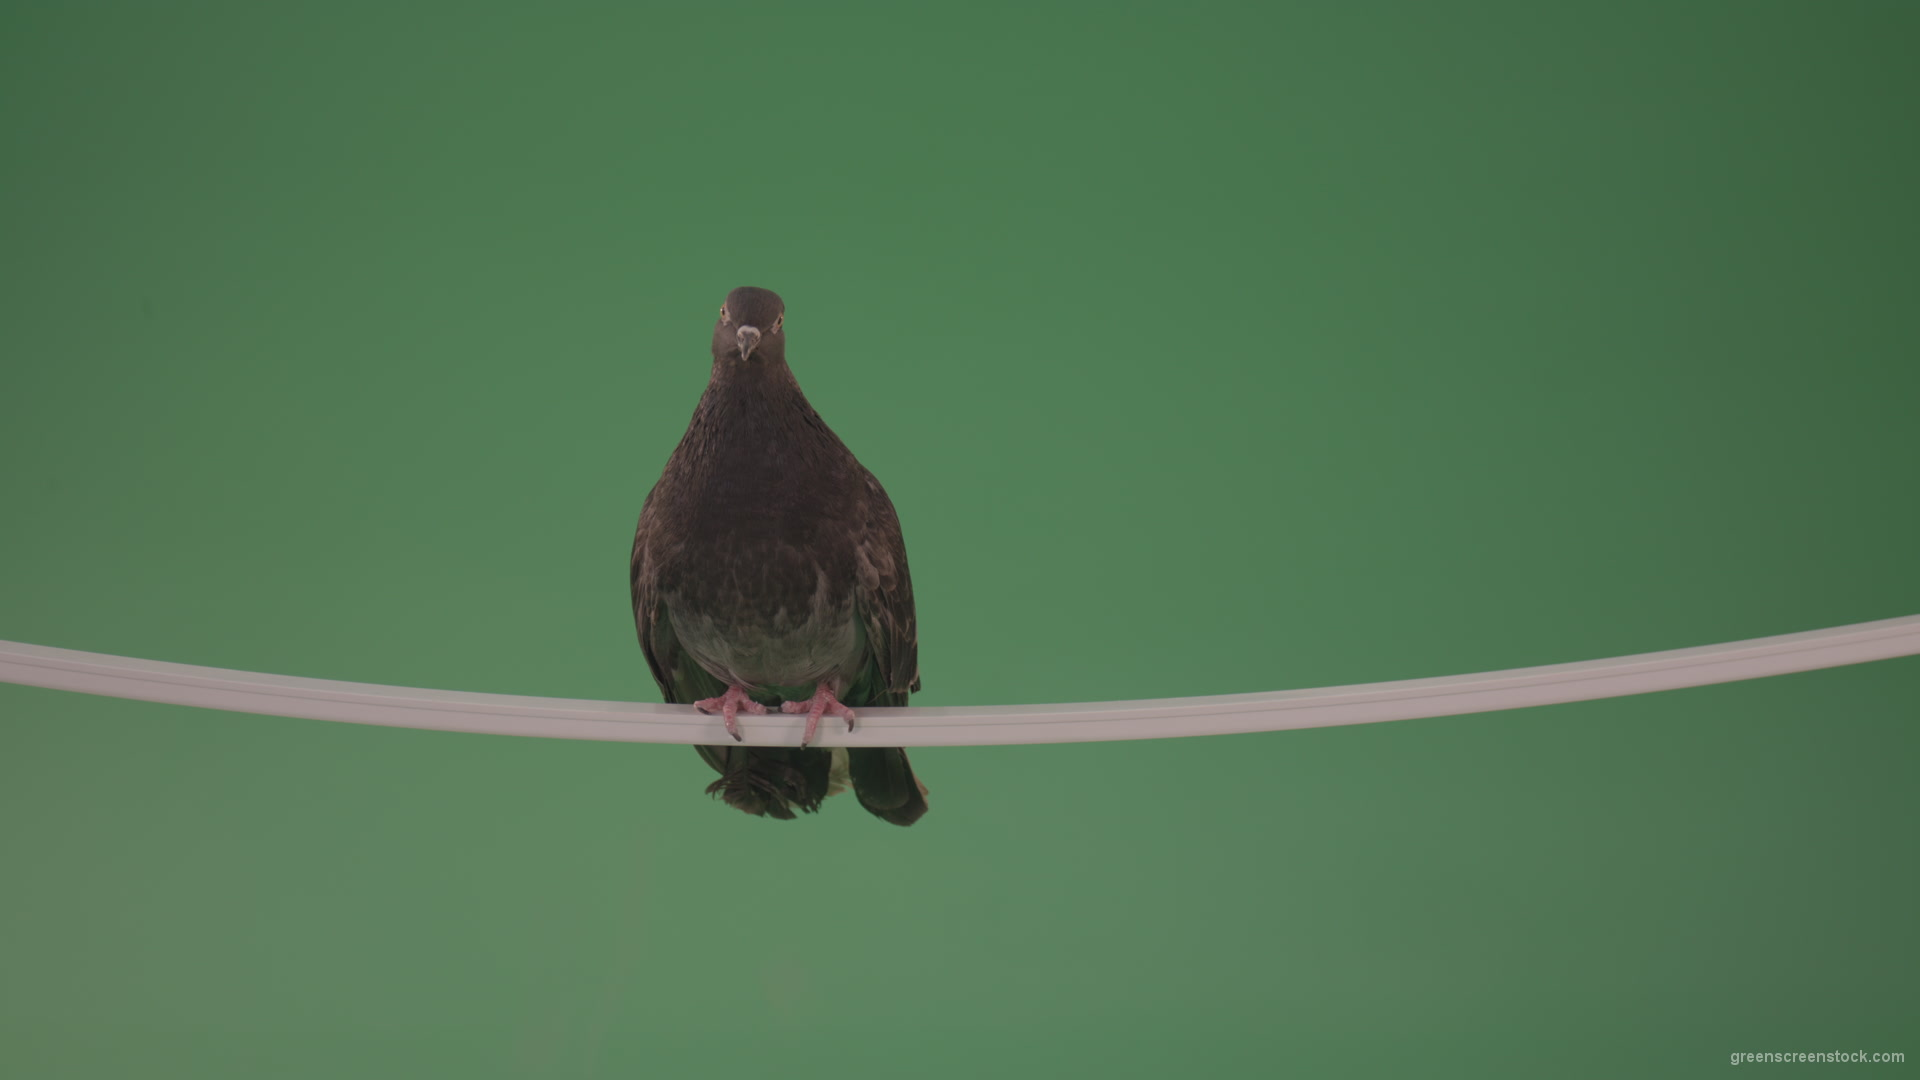 Sitting-bird-doves-on-a-pipe-in-a-big-city-isolated-on-chromakey-background_007 Green Screen Stock